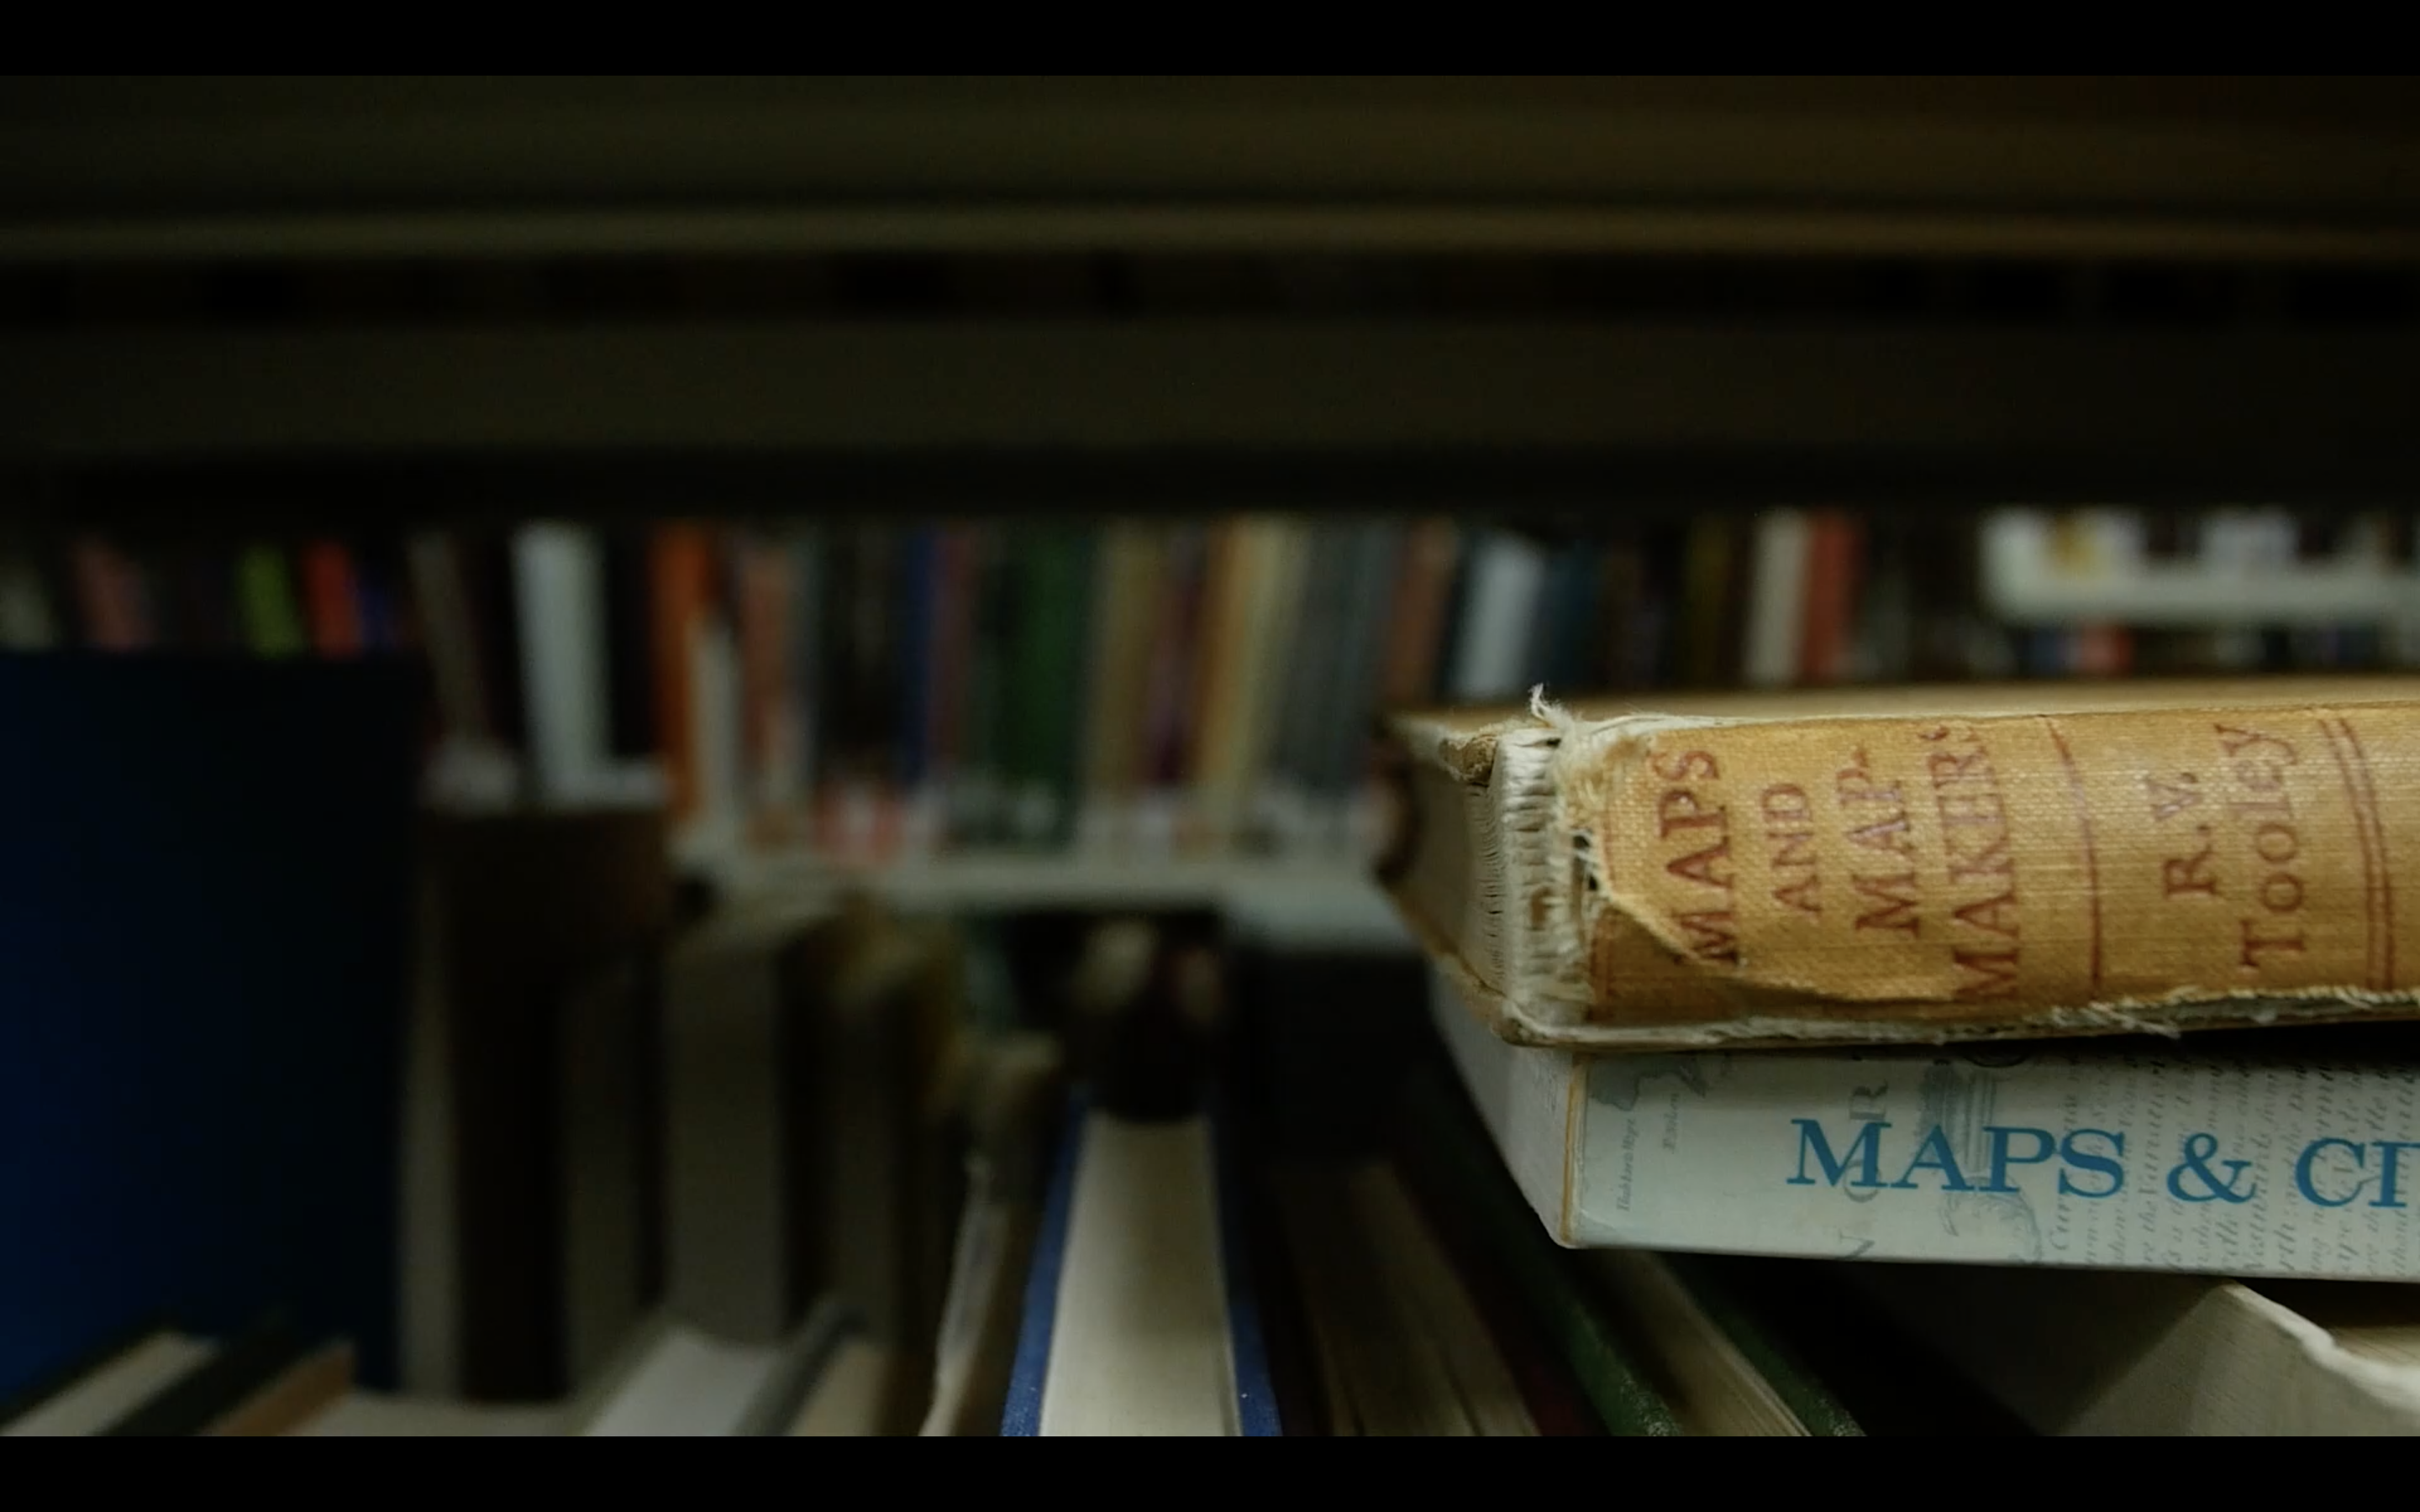 Close up photograph of a library bookshelf, with blurry books in the background, and two books laying on their sides in the right foreground. The titles "Maps" and "Maps and Mapmakers" are visible on the spines of the books. 